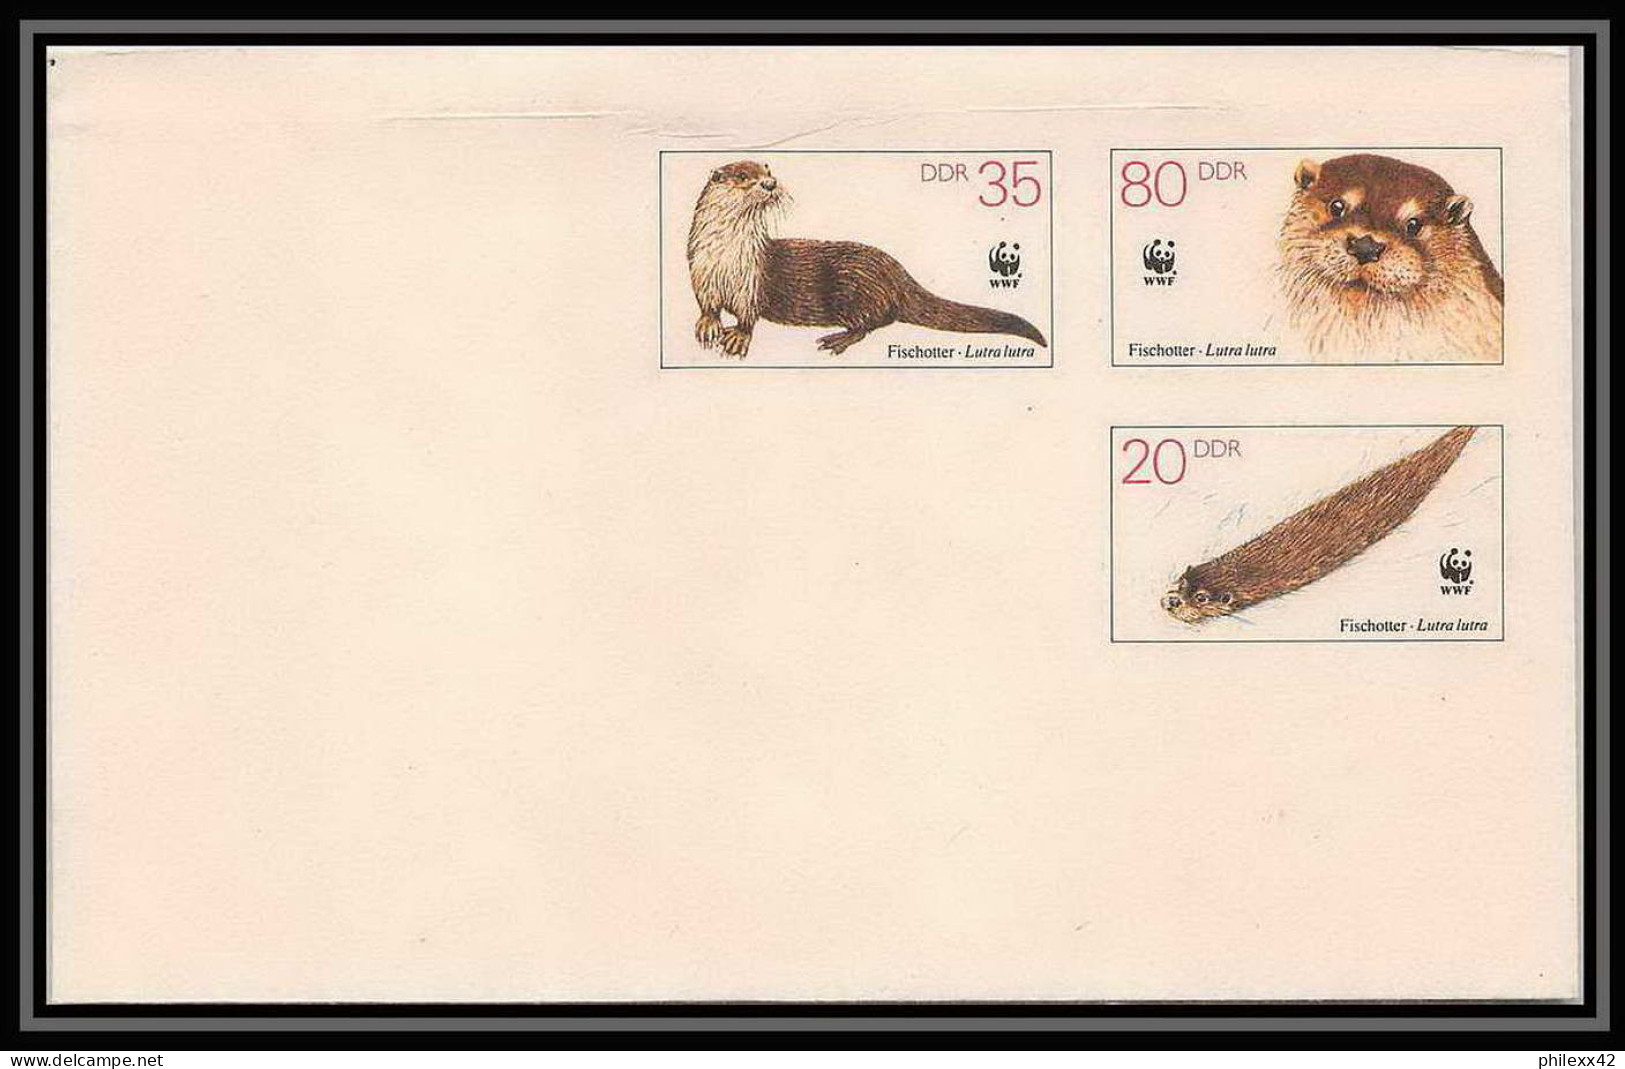 2167/ Allemagne (germany DDR) Lot De 3 Entiers Stationery Enveloppe (cover) Wwwf Animaux Animals 1987 - Enveloppes - Neuves